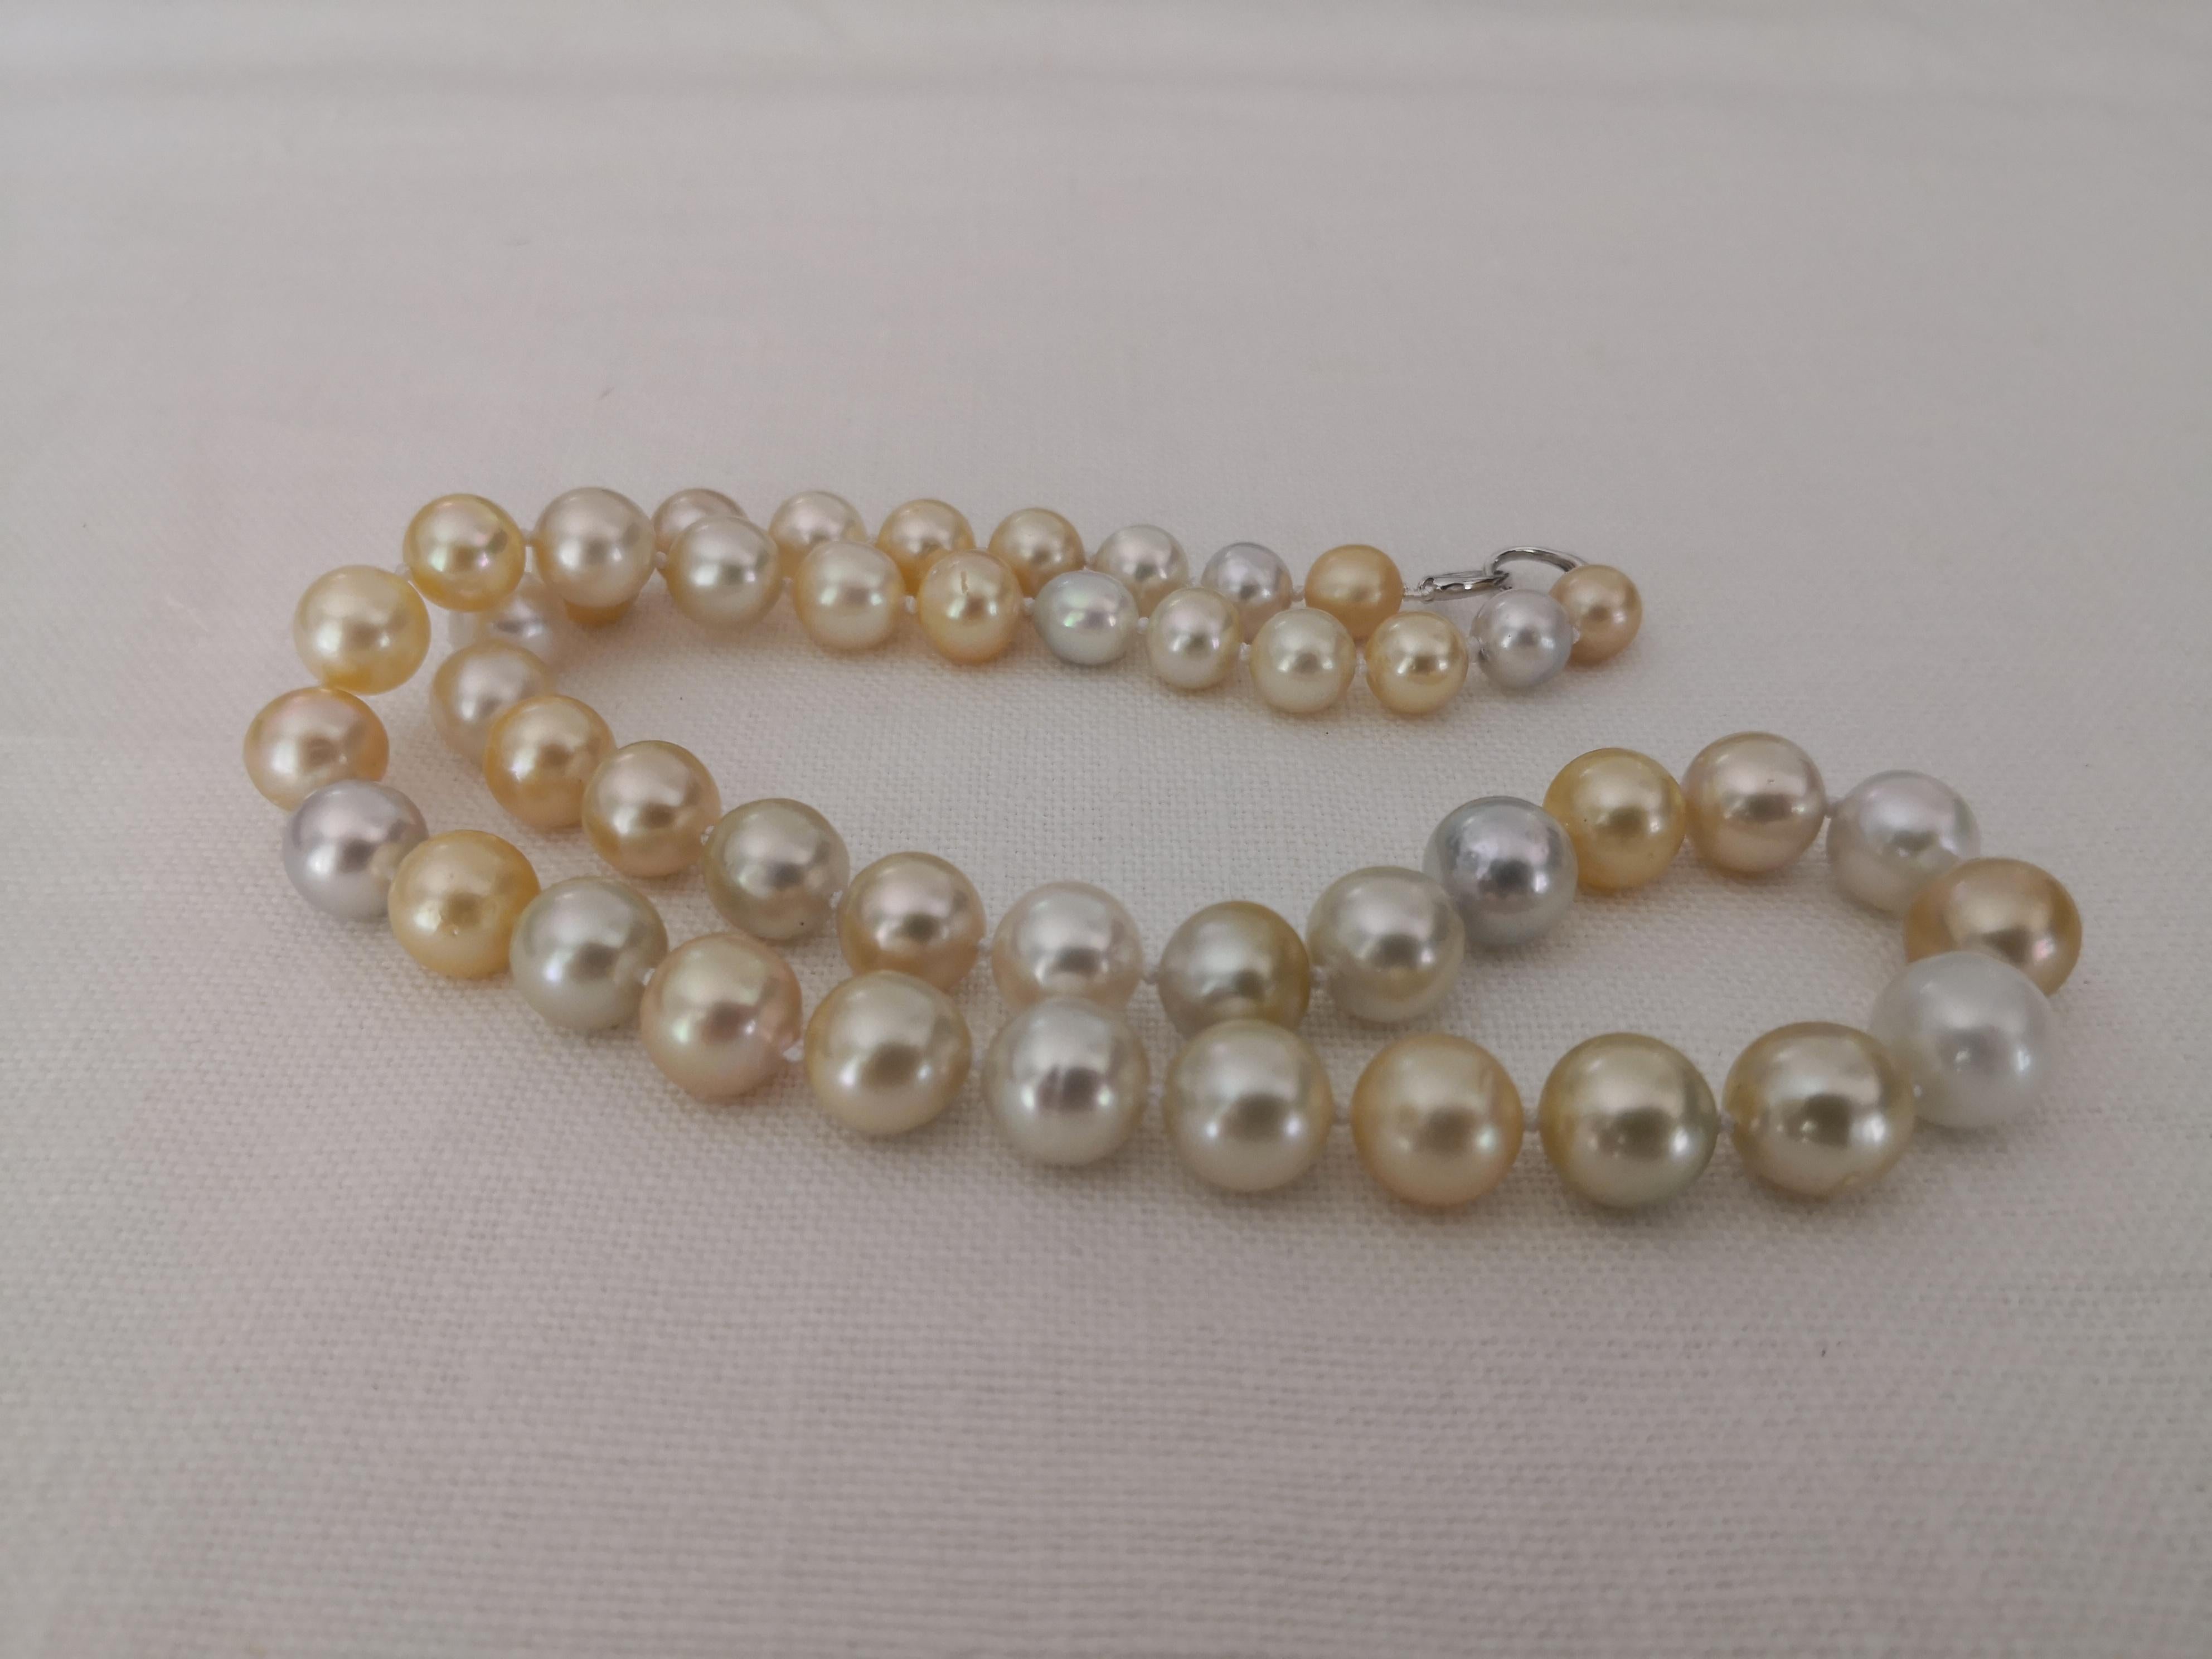 A Natural Color South Sea Pearls necklace

- Size of Pearls 8-11 mm of diameter

- Pearls from Pinctada Maxima Oyster

- Origin: Indonesia ocean waters

- Natural Golden and White Color pearls and overtones

- High Natural luster and orient

-